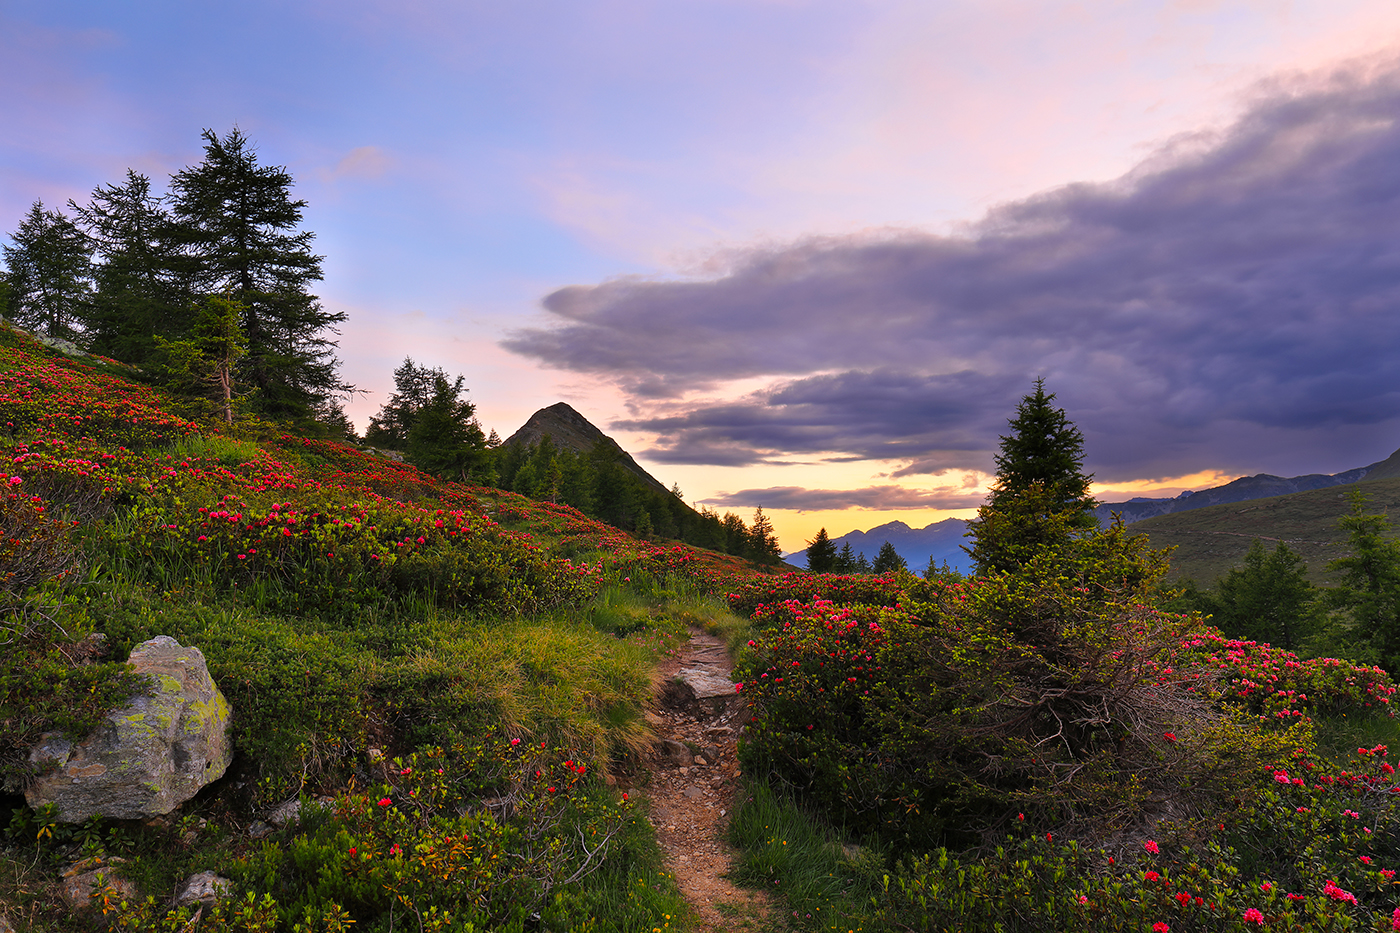 Rhododendrons Bloom at the Pianaccio of the Mortirolo...